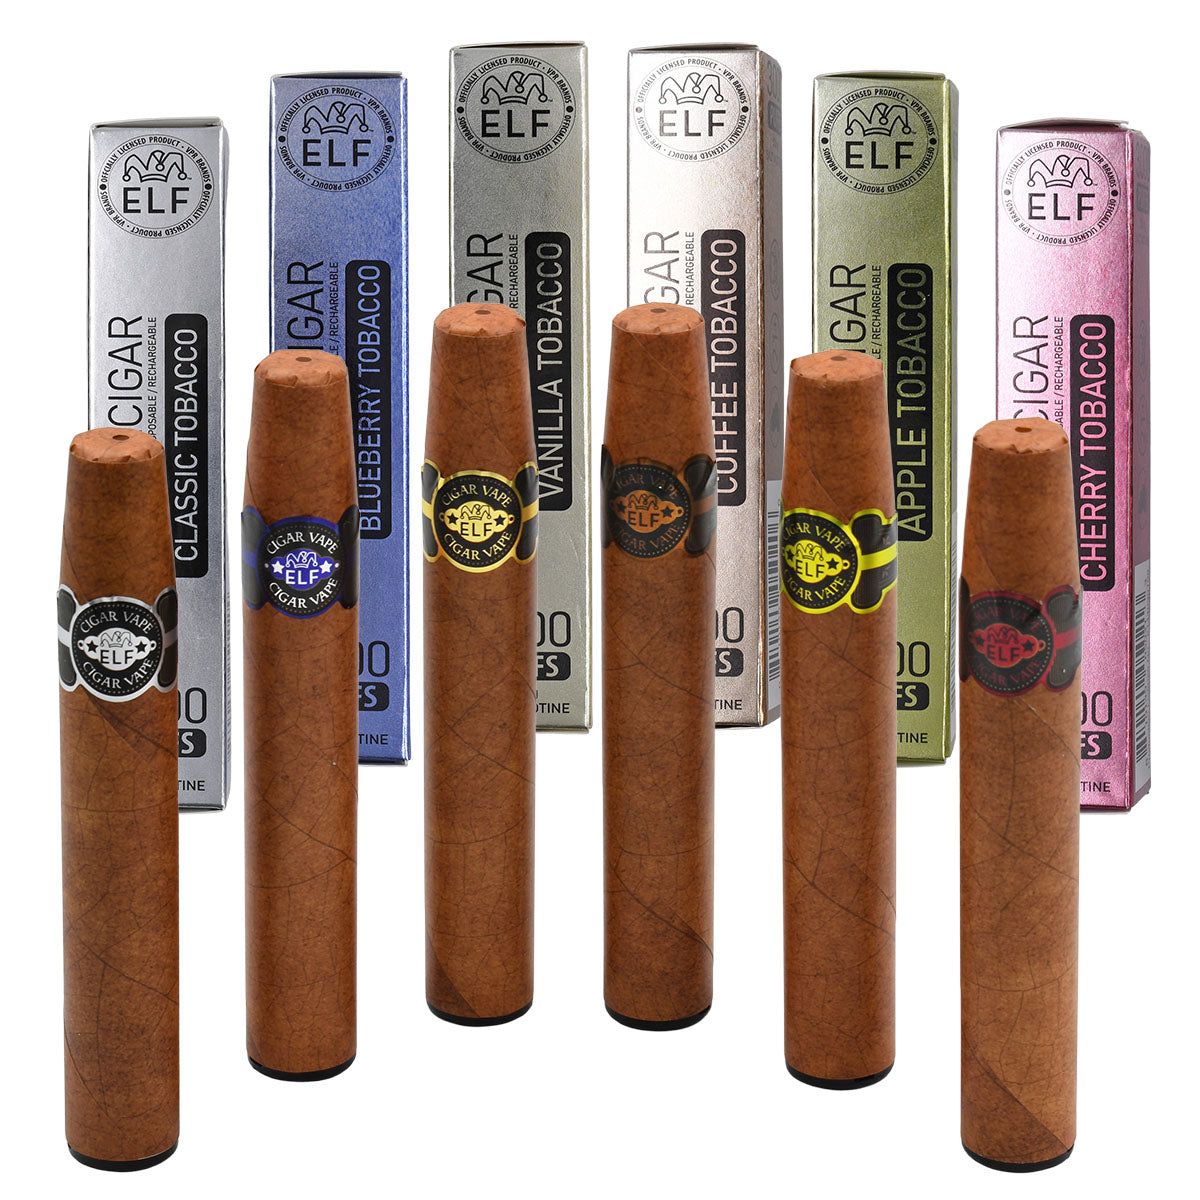 Elf Cigar Vape to buy in 6 flavors: Classic Tobacco, Blueberry, Vanilla, Coffee, Apple and Cherry Tobacco.